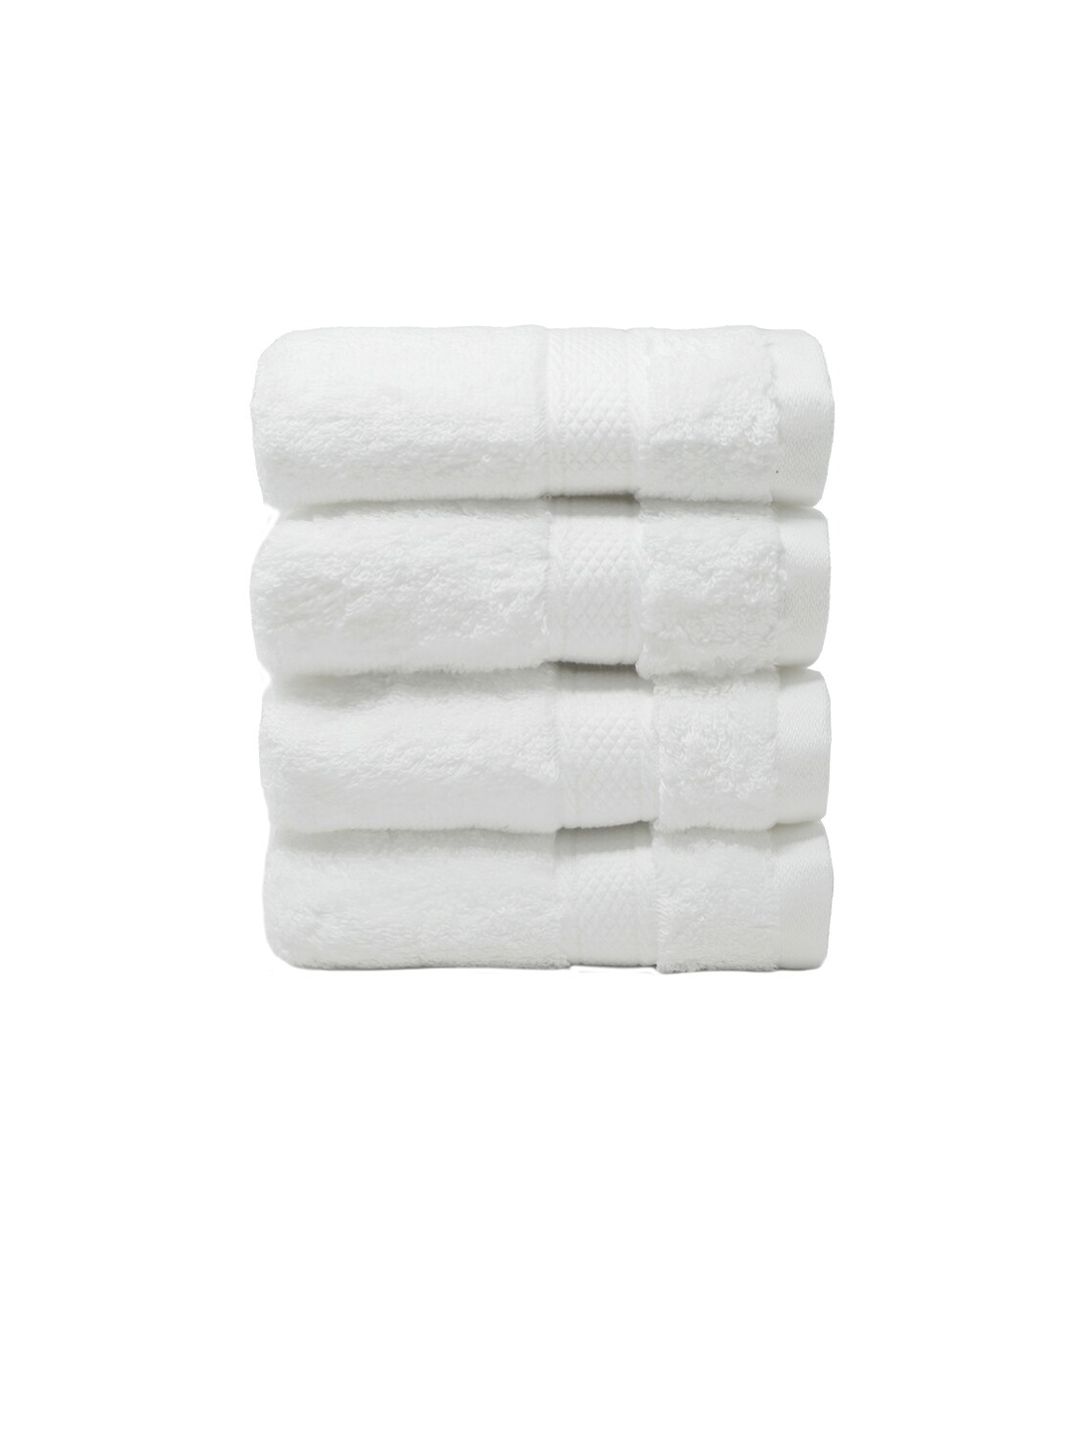 Trident Set Of 4 White Solid 575 GSM Cotton Face Towels Price in India